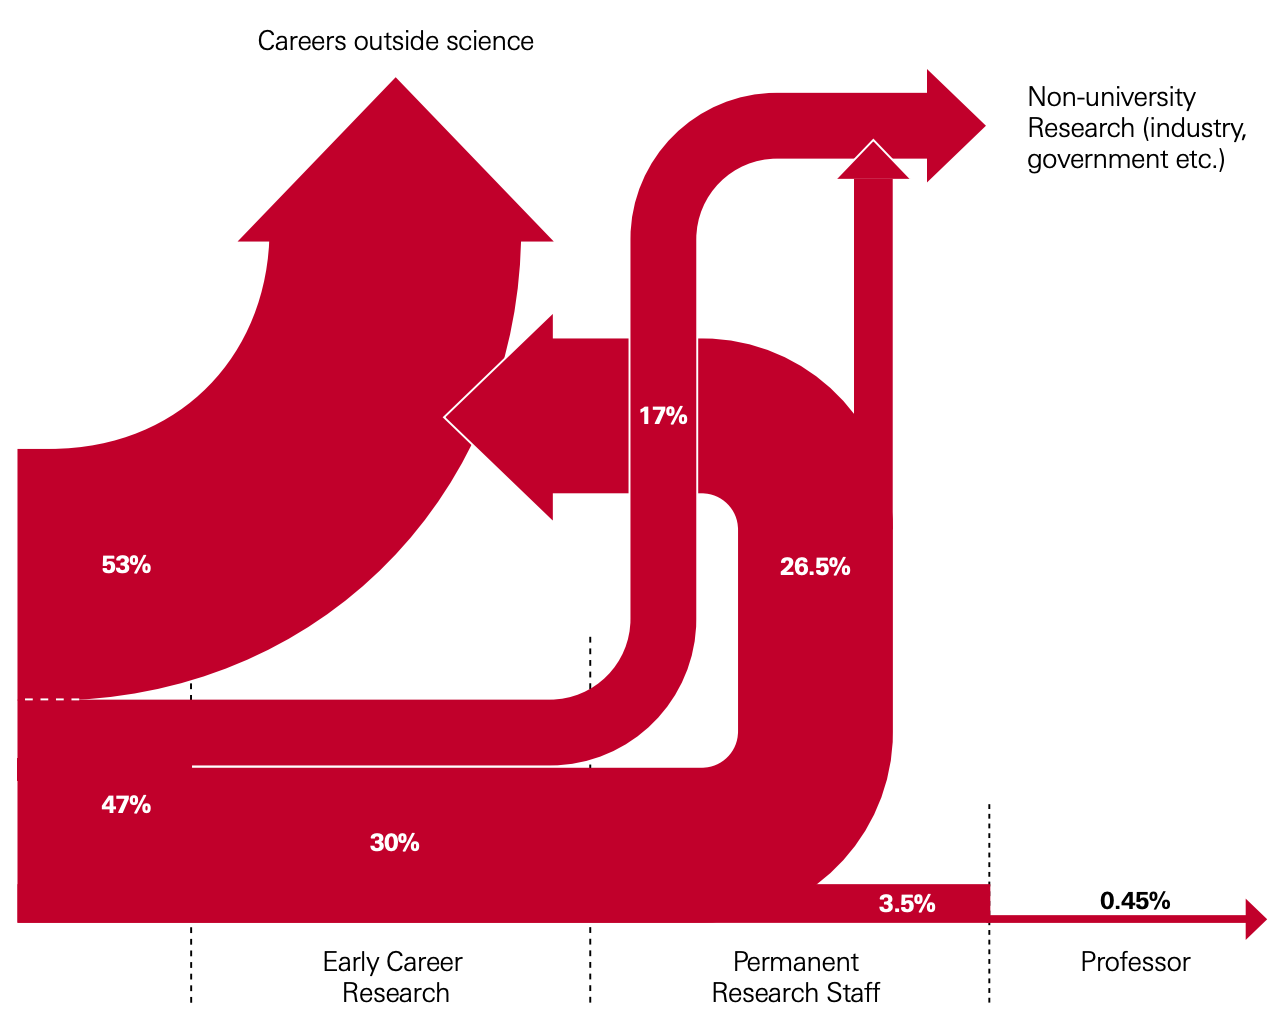 Figure depicting the percentage of PhD holders pursuing careers outside science, continuing on to early career research, industry, or permanent research staff. The “Careers outside science” group totals ~80% if you add the 53% right after the PhD and 26.5% after some early career work (e.g. postdoc or adjunct professor).